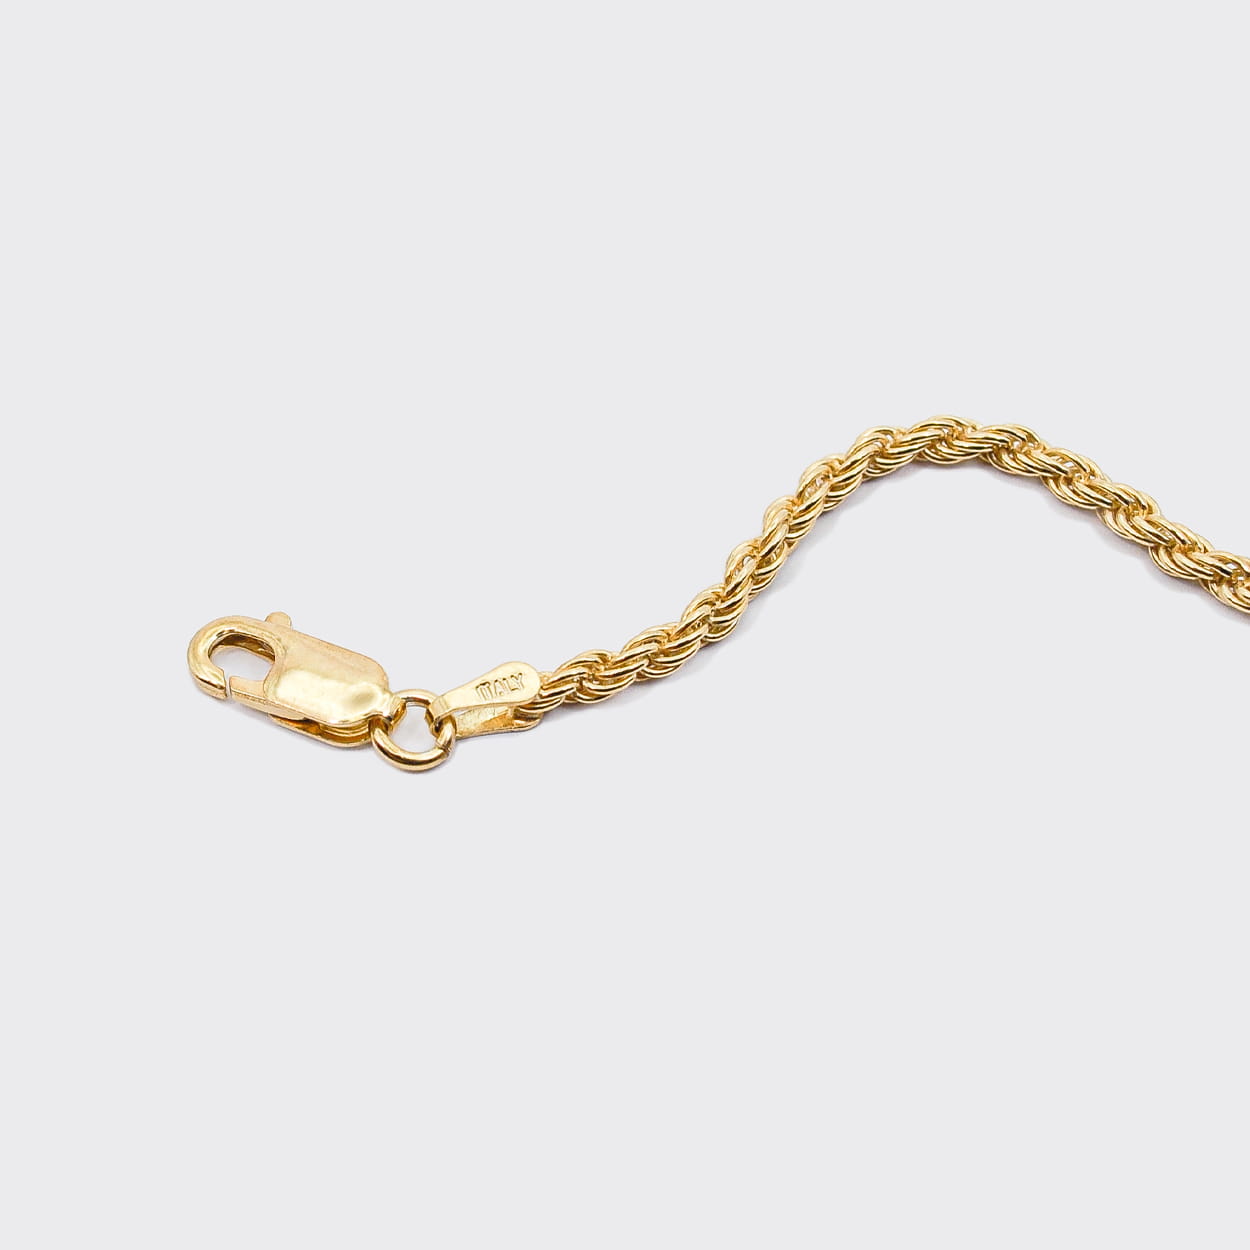 The Rope bracelet is an elegant and unisex piece of jewelry, crafted in Italy and made of 925 Sterling Silver with a high-quality 18 karat gold plating. Every jewelry is designed by Atelier Domingo's in France and is made to be worn by both men and women.